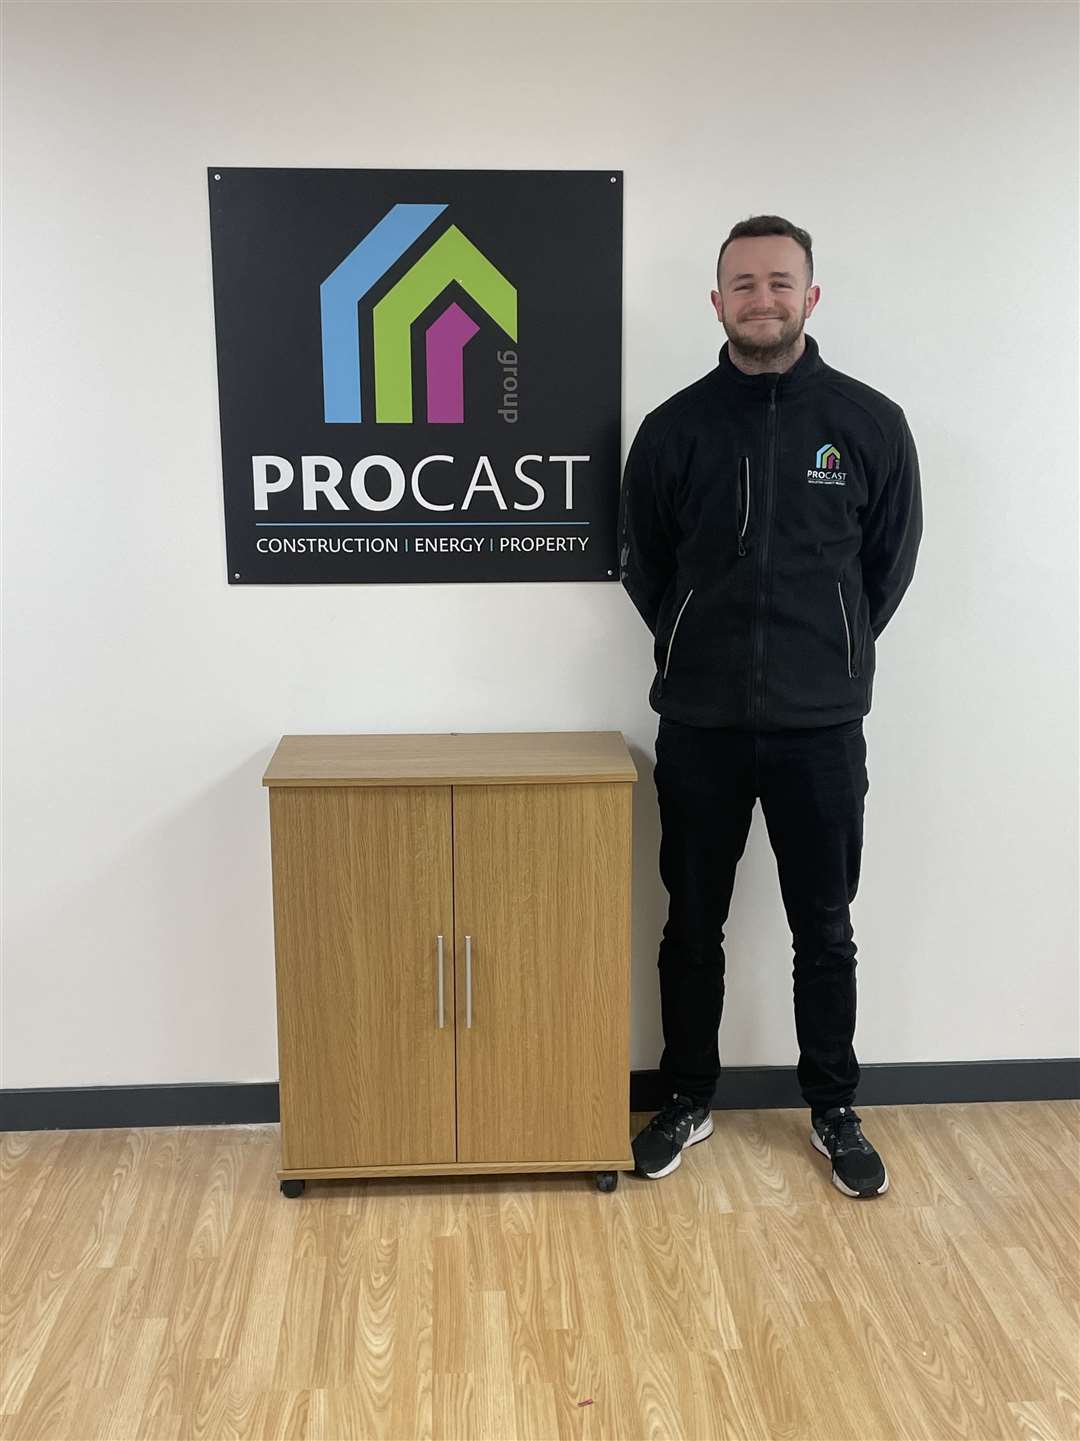 Procast Group's quantity surveyor Ryan Thomson in the new office.